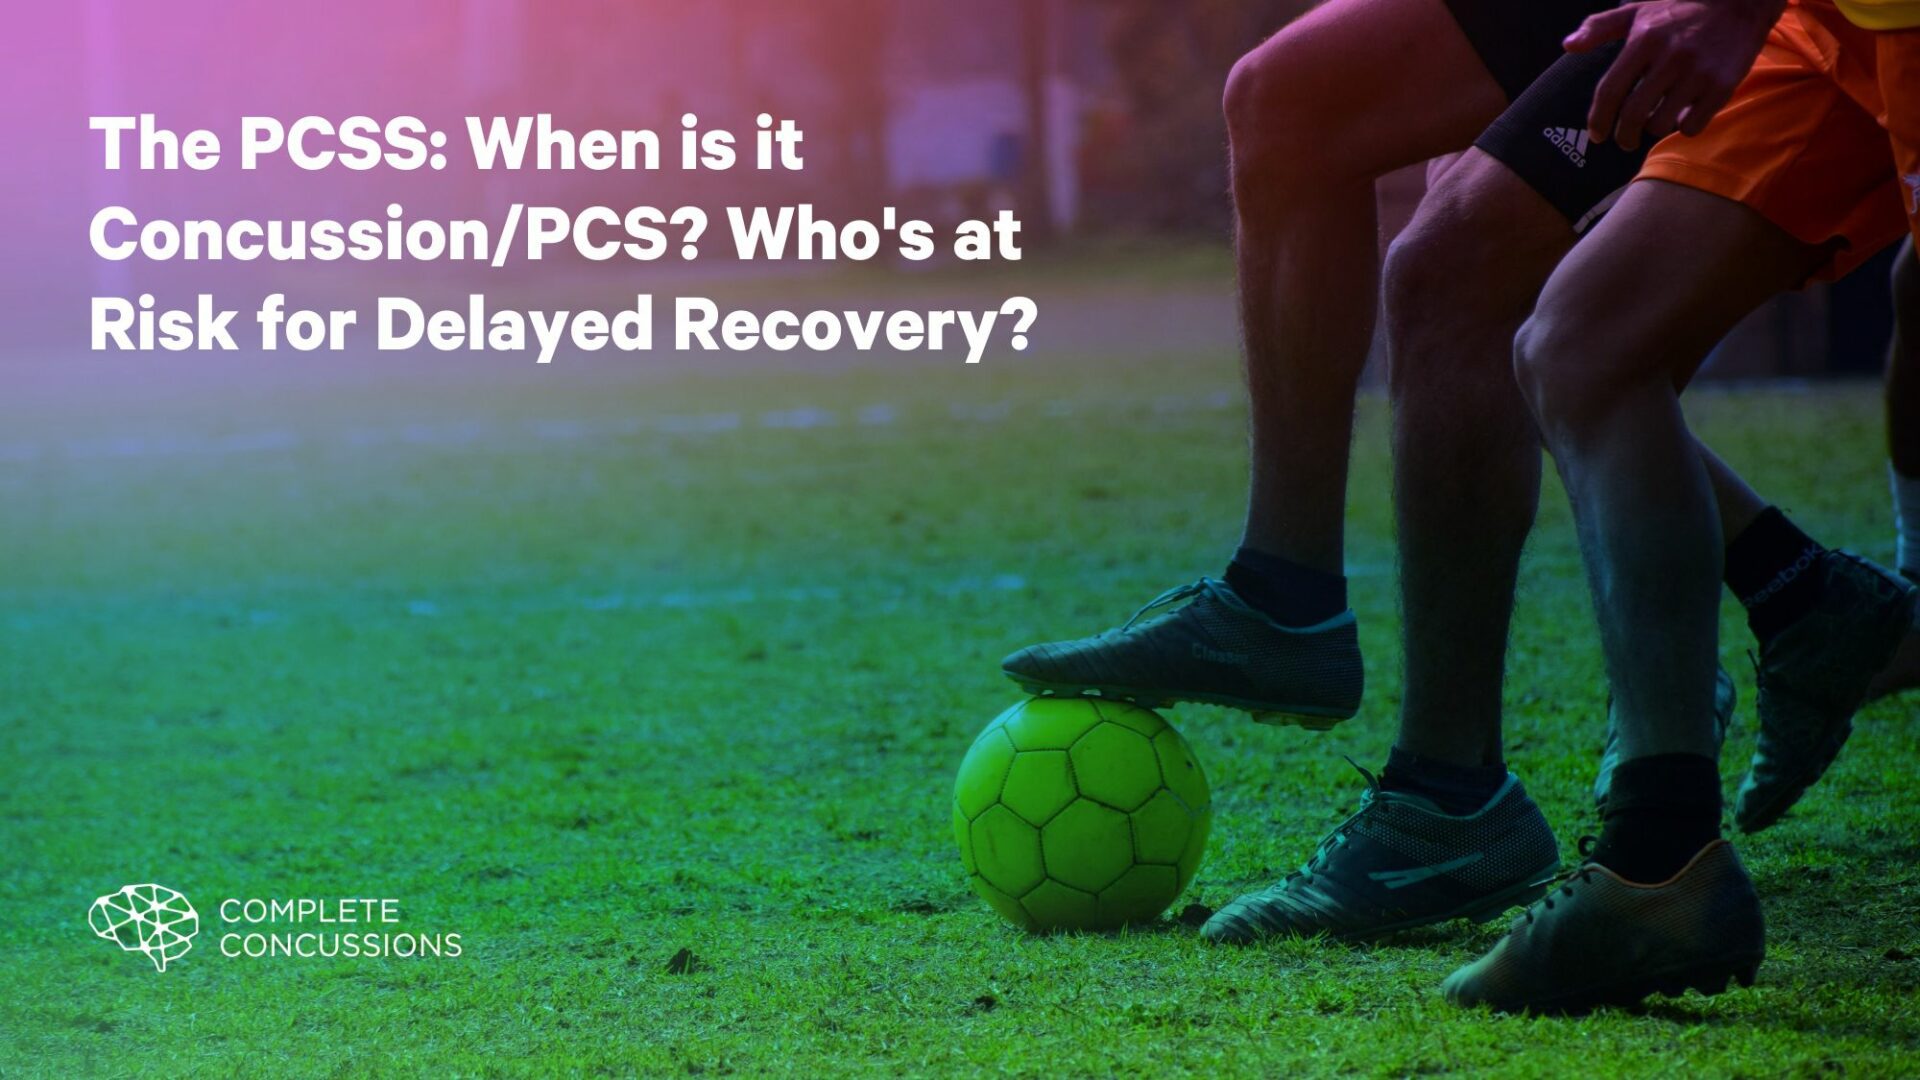 The PCSS: When is it Concussion/PCS? Who’s at Risk for Delayed Recovery?